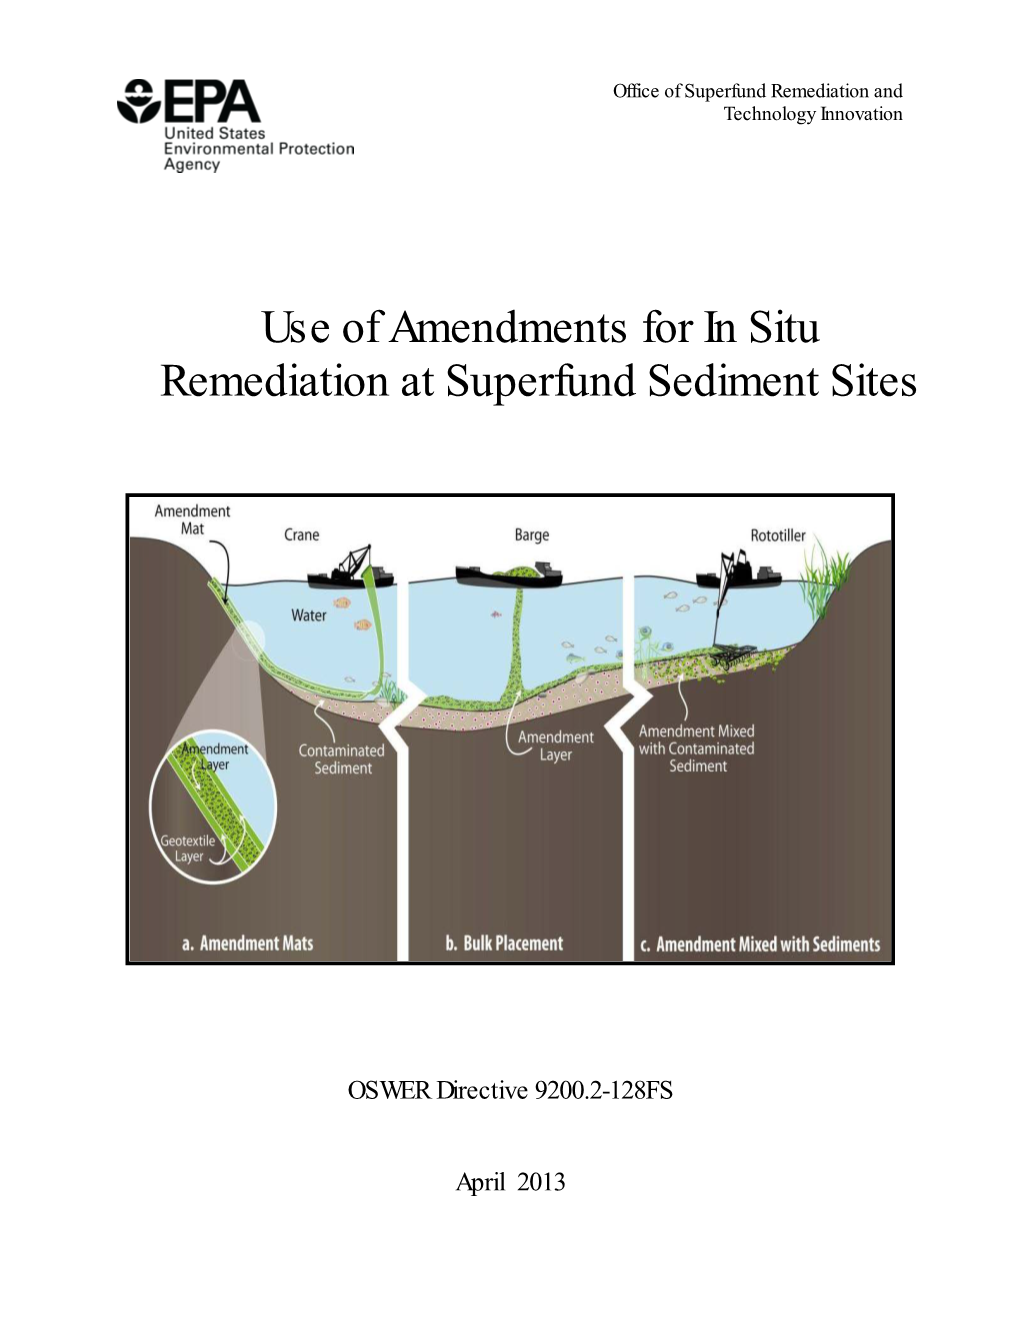 Use of Amendments for in Situ Remediation at Superfund Sediment Sites